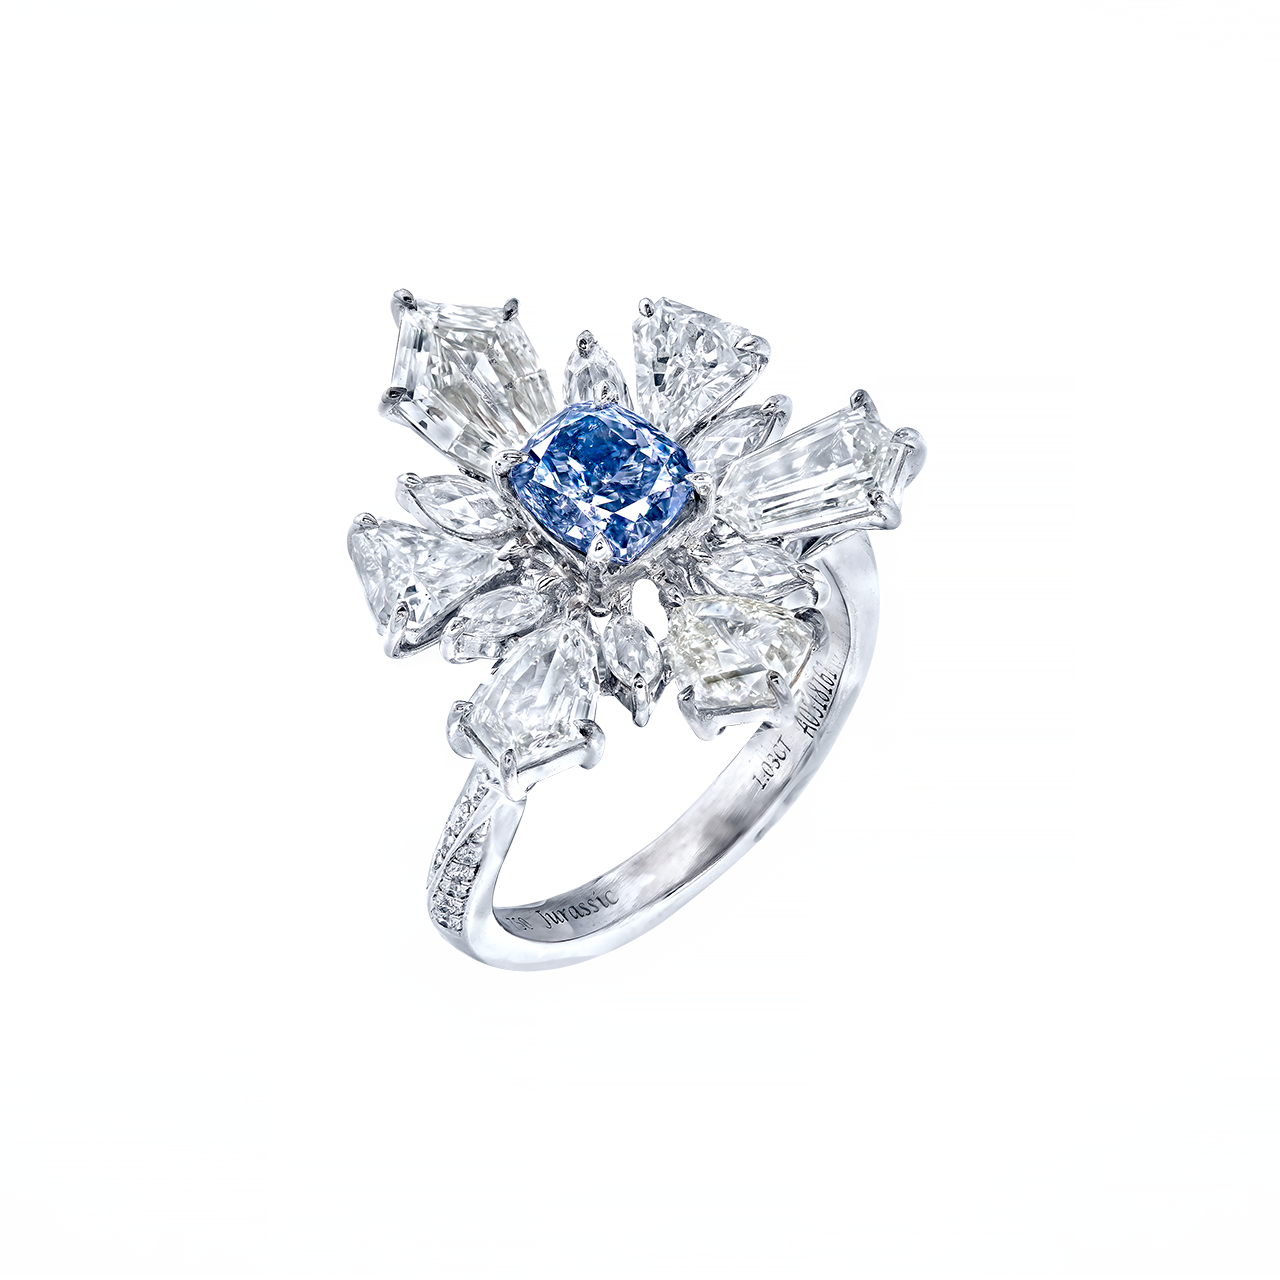 GIA 1.03克拉  藍彩鑽鑽石戒
FANCY BLUE COLOURED DIAMOND 
AND DIAMOND RING